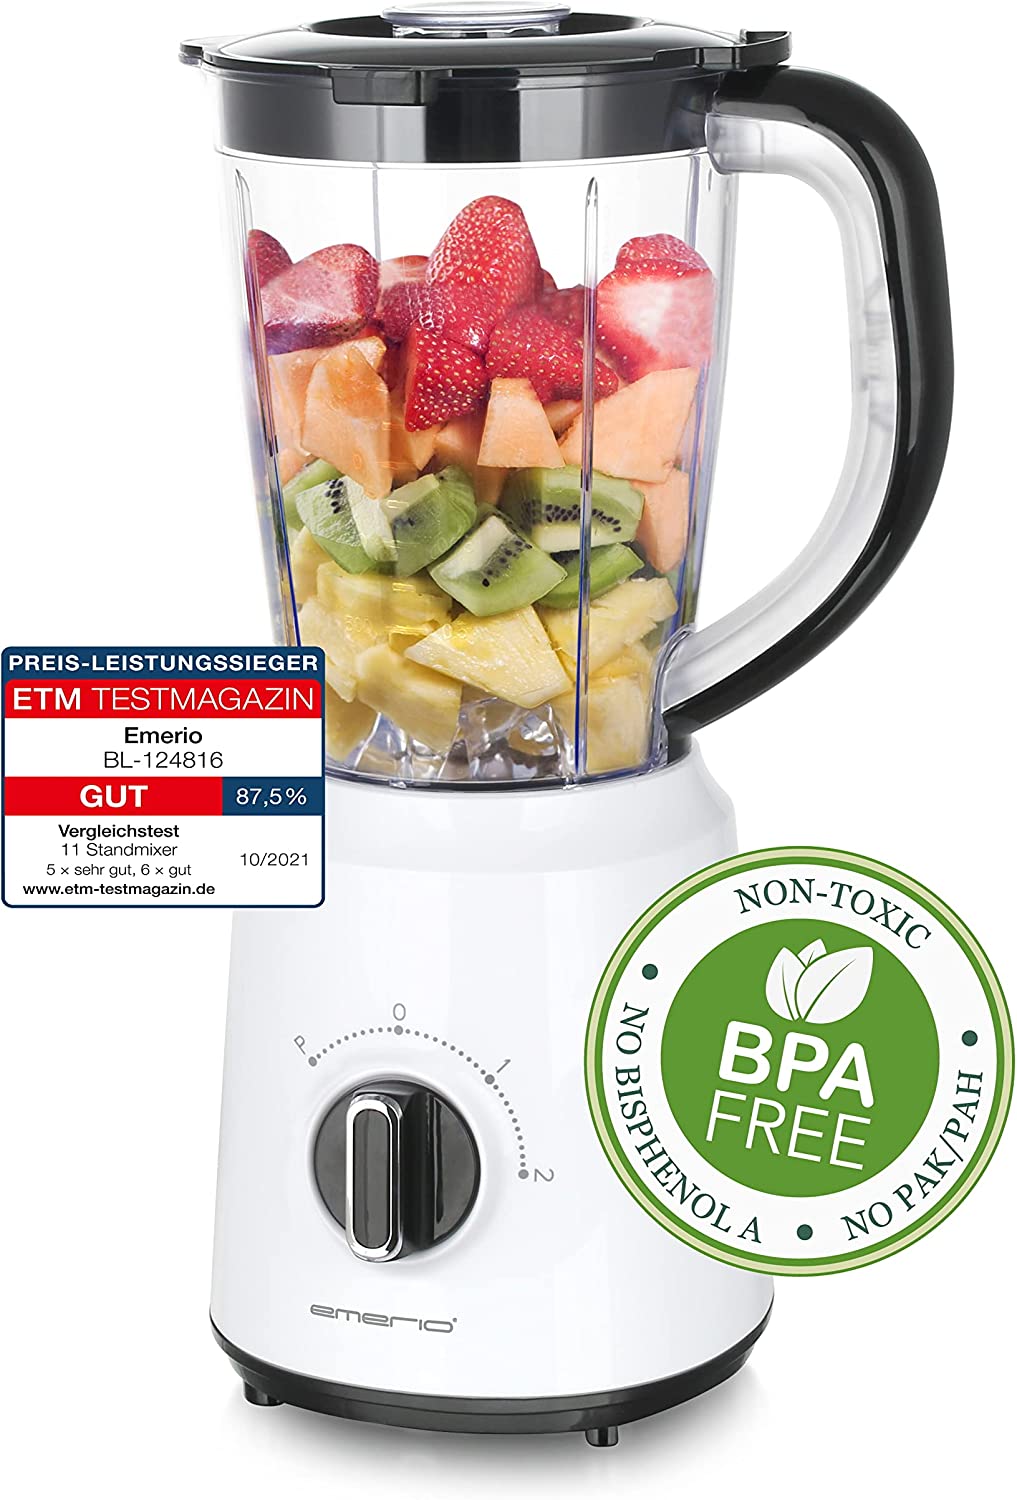 Emerio Blender BL-124816, BPA-free, Crush Ice function, 1.5 L container, 2 speeds + pulse function, stainless steel knife unit, safety switch, dishwasher-safe, 500 Watt